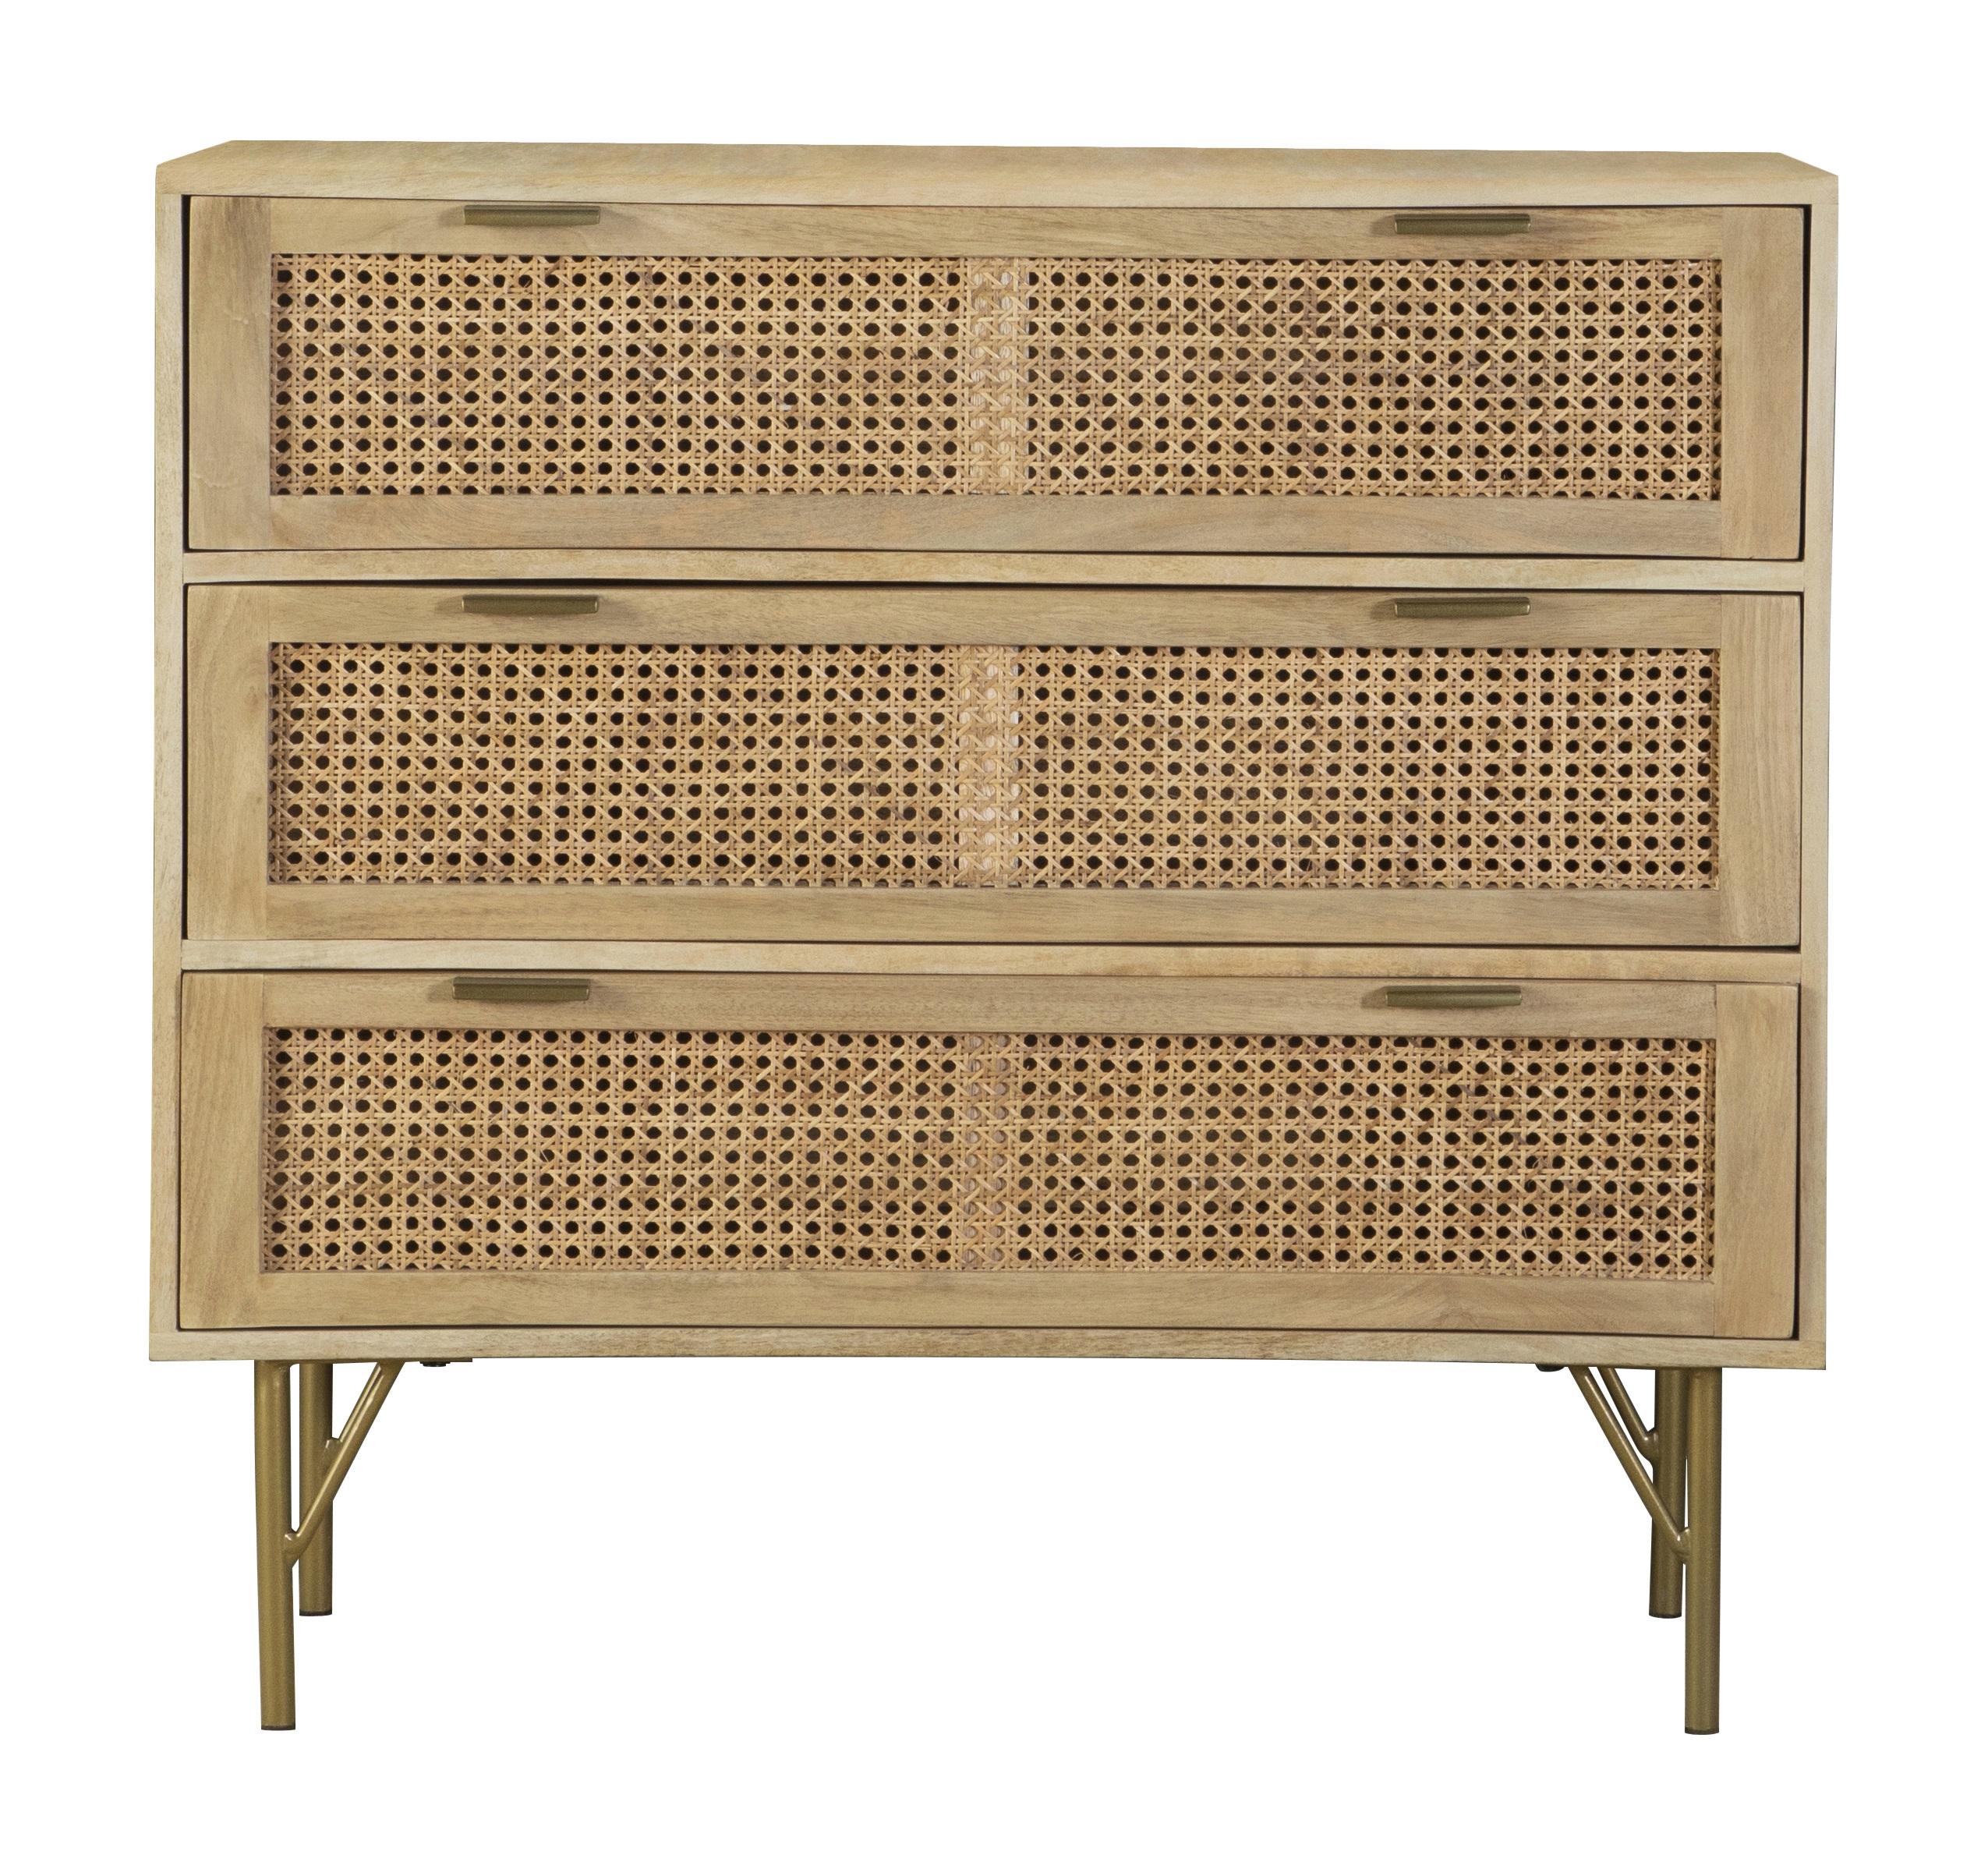 Contemporary Accent Cabinet 959579 959579 in Natural 